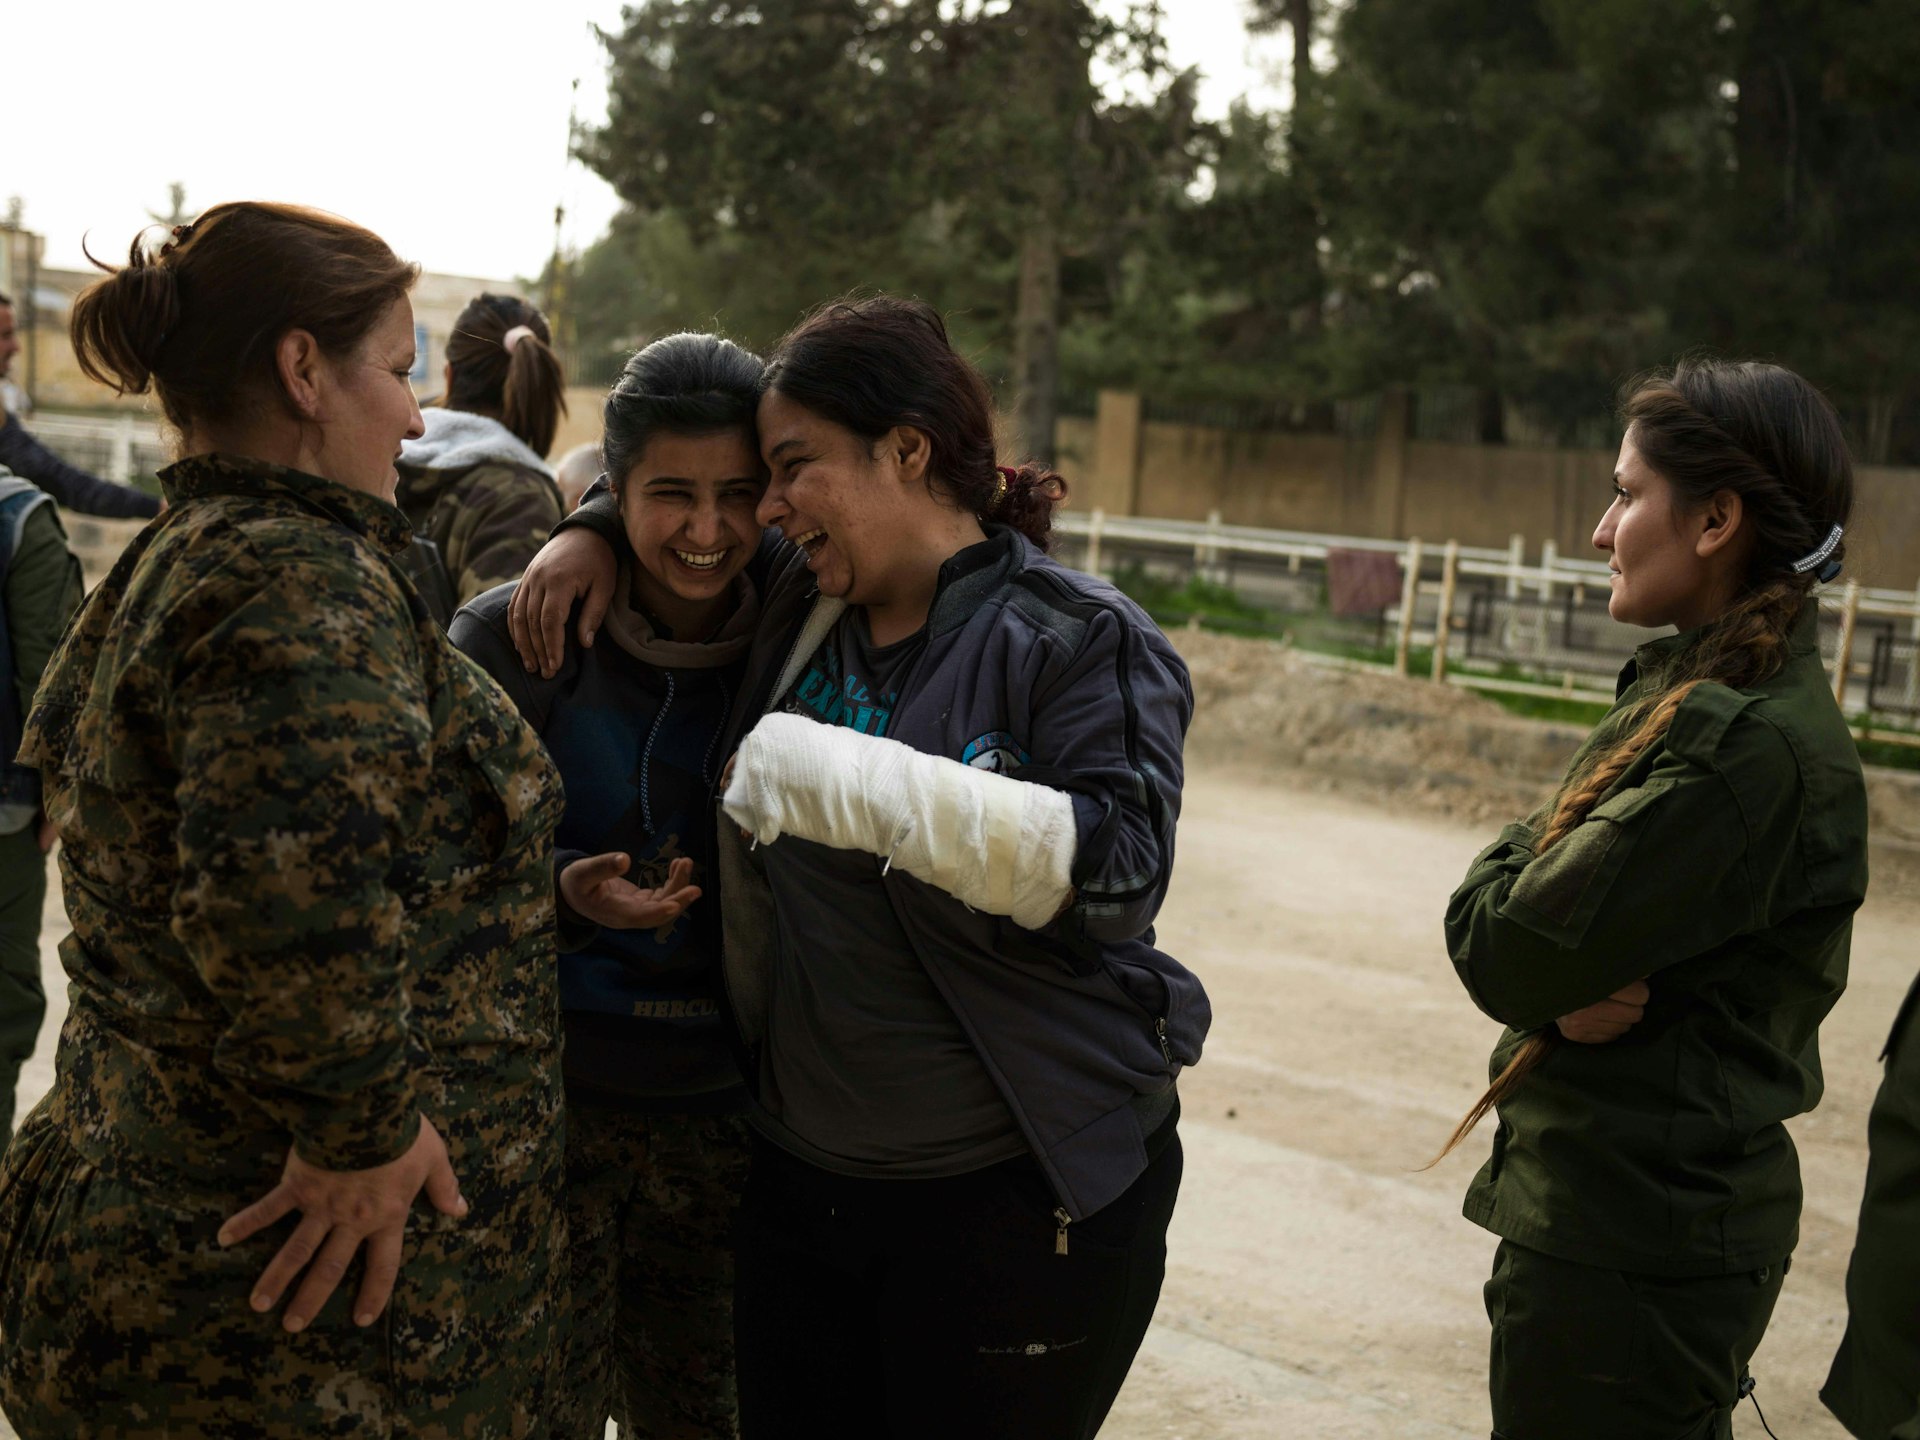 Wounded YPJ members leave the Asayesh all-women security base in Derek. © Newsha Tavakolian / Magnum Photos